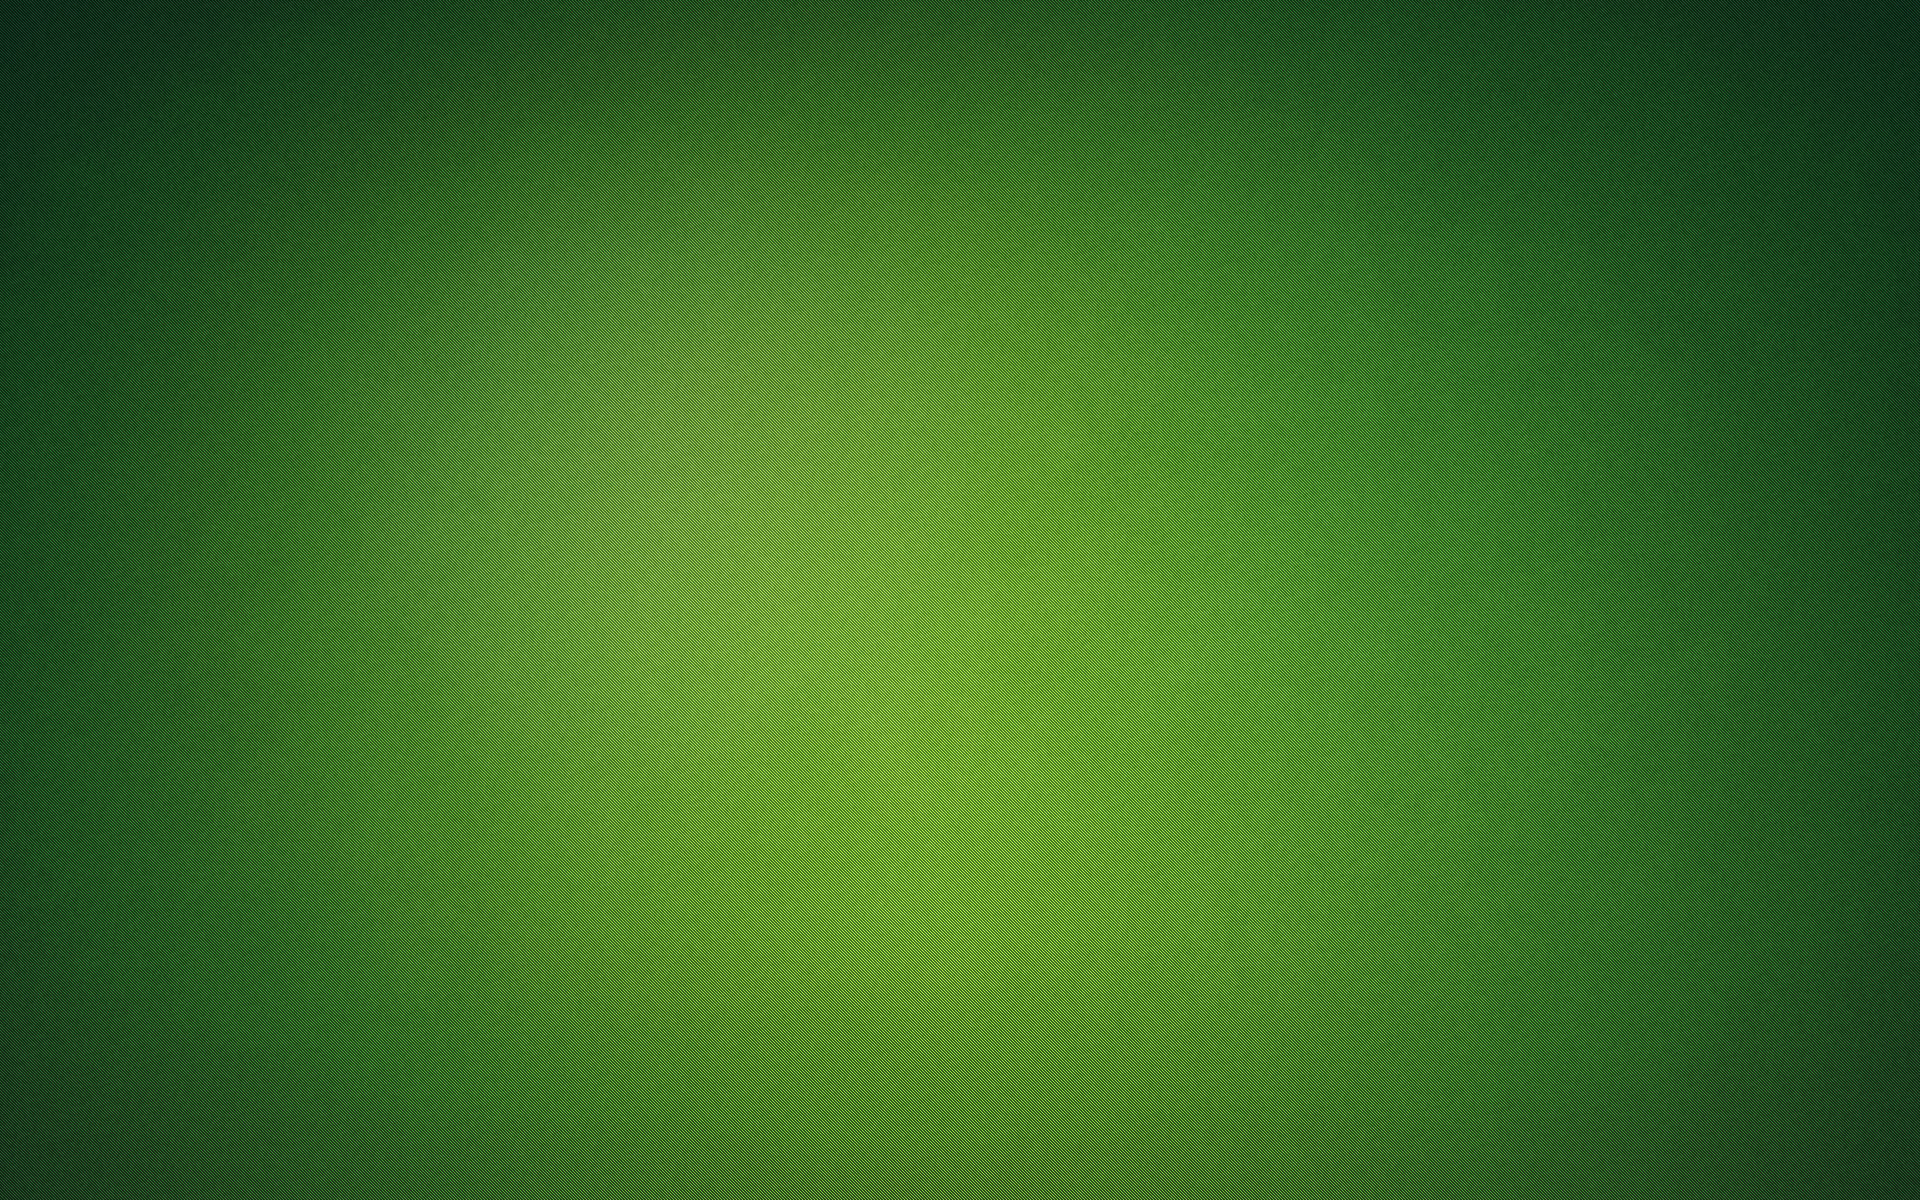 green, abstract, backgrounds, simple background, green background - desktop wallpaper